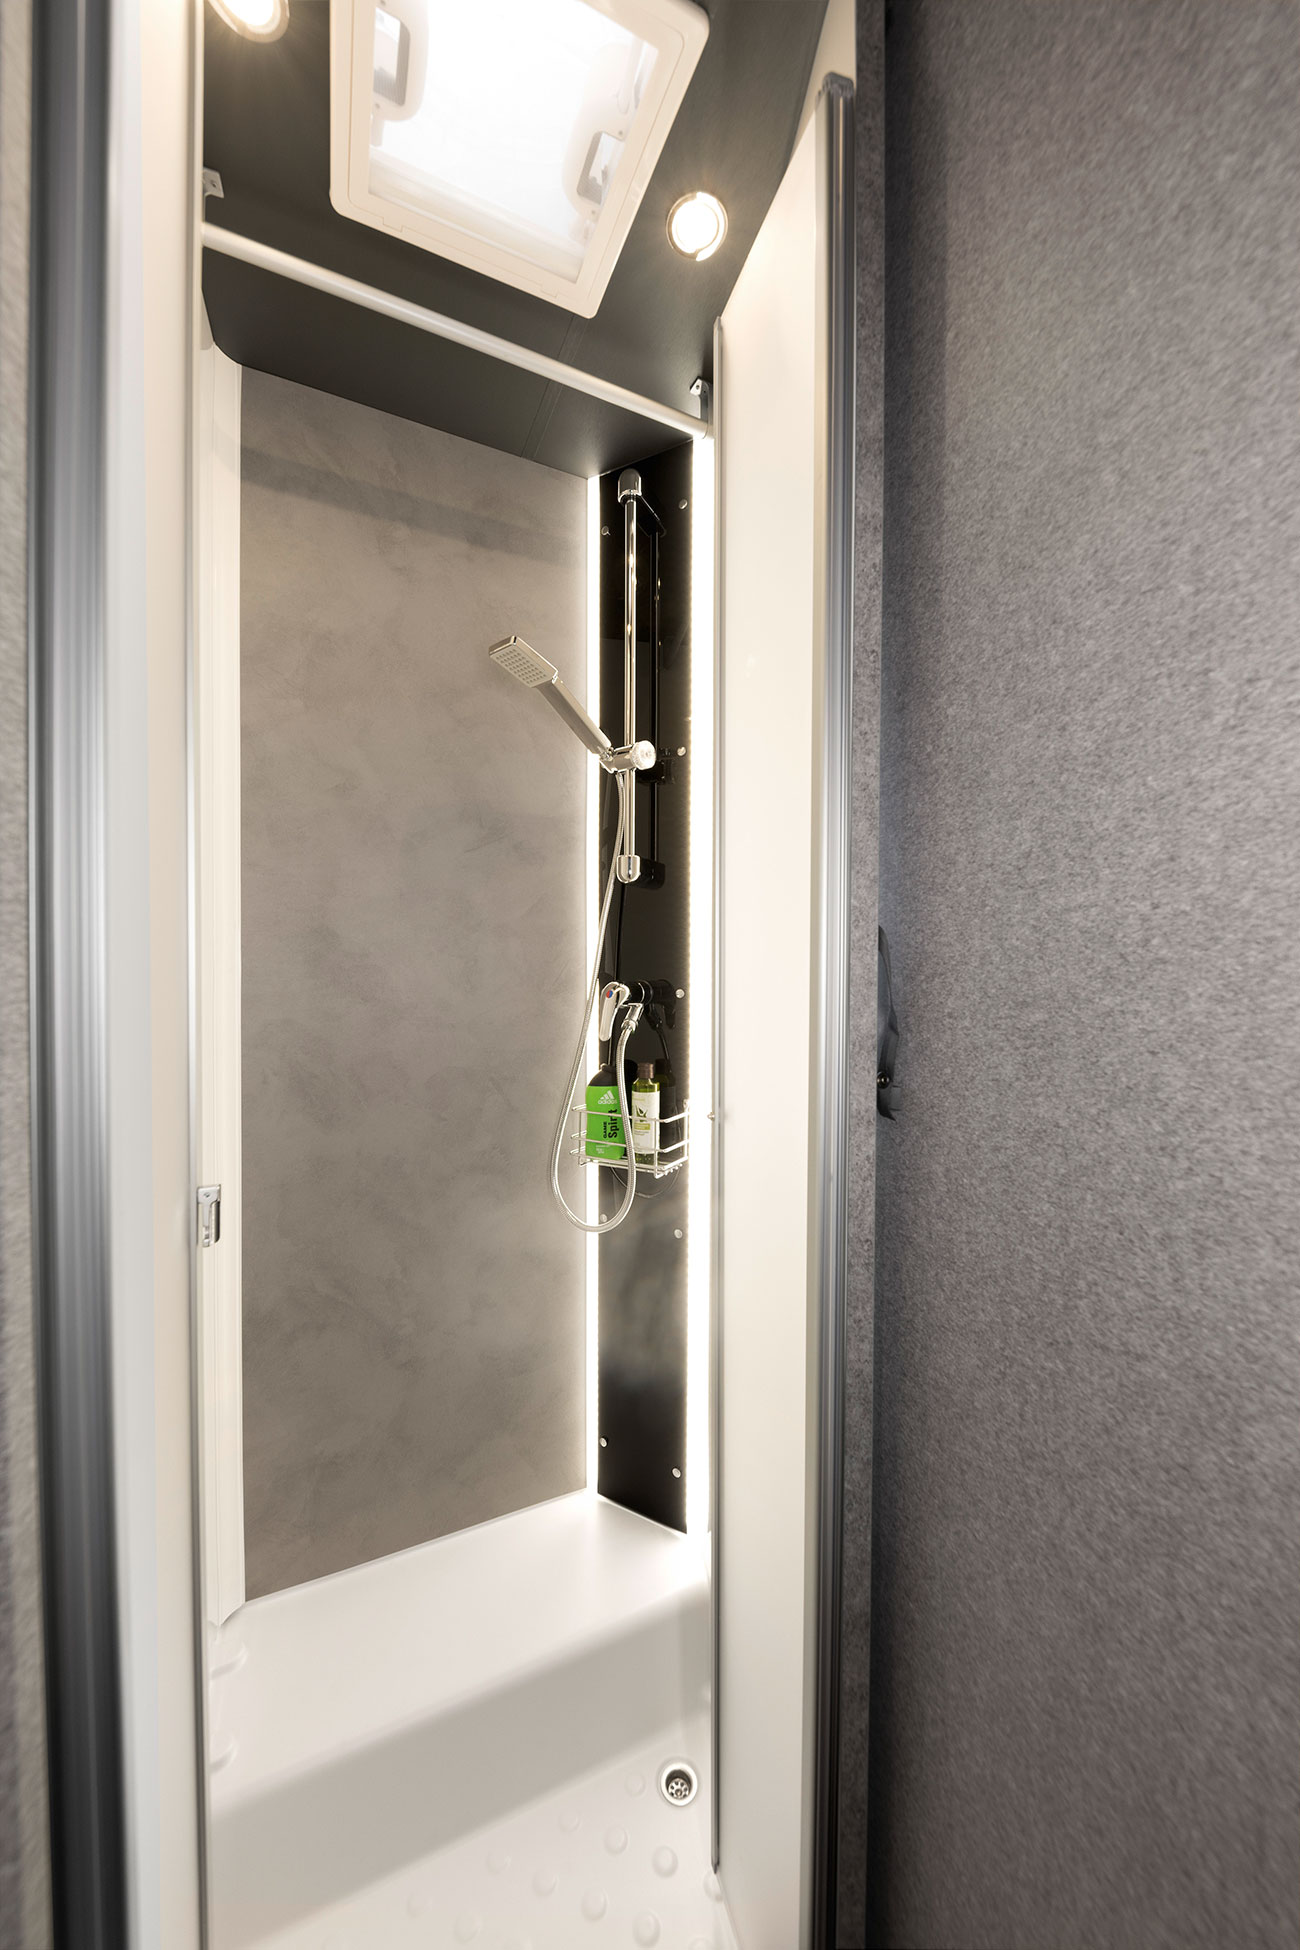 The shower combines plenty of elbow room with an elegant design. The backlit shower equipment is included with the optional Light Moments ambient lighting system.